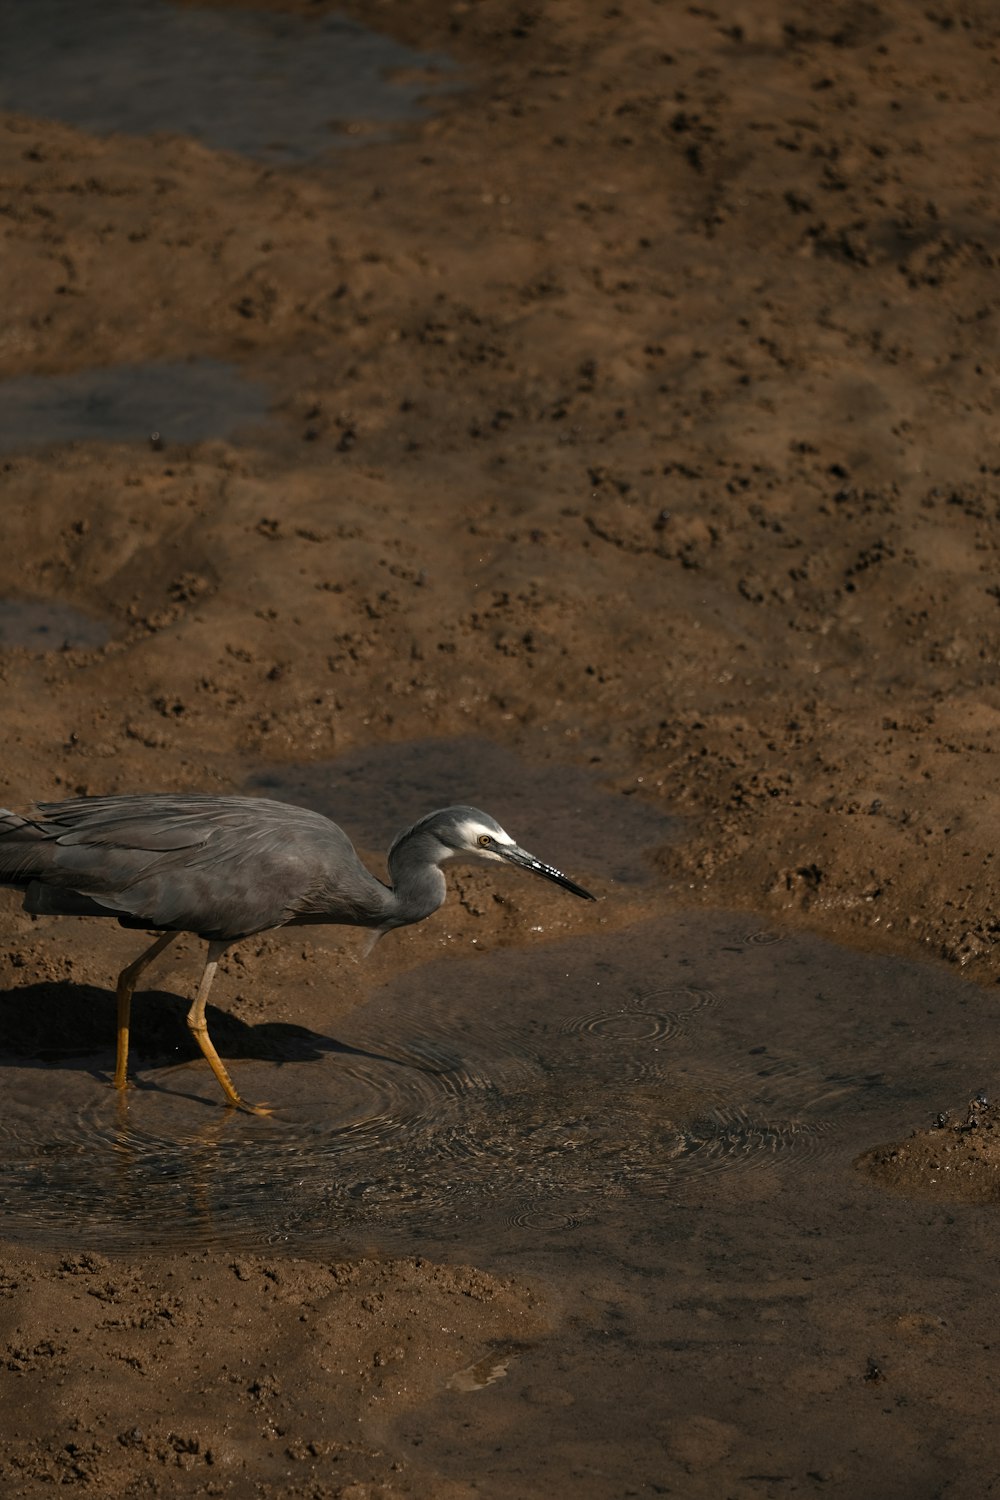 a bird standing in a puddle of water